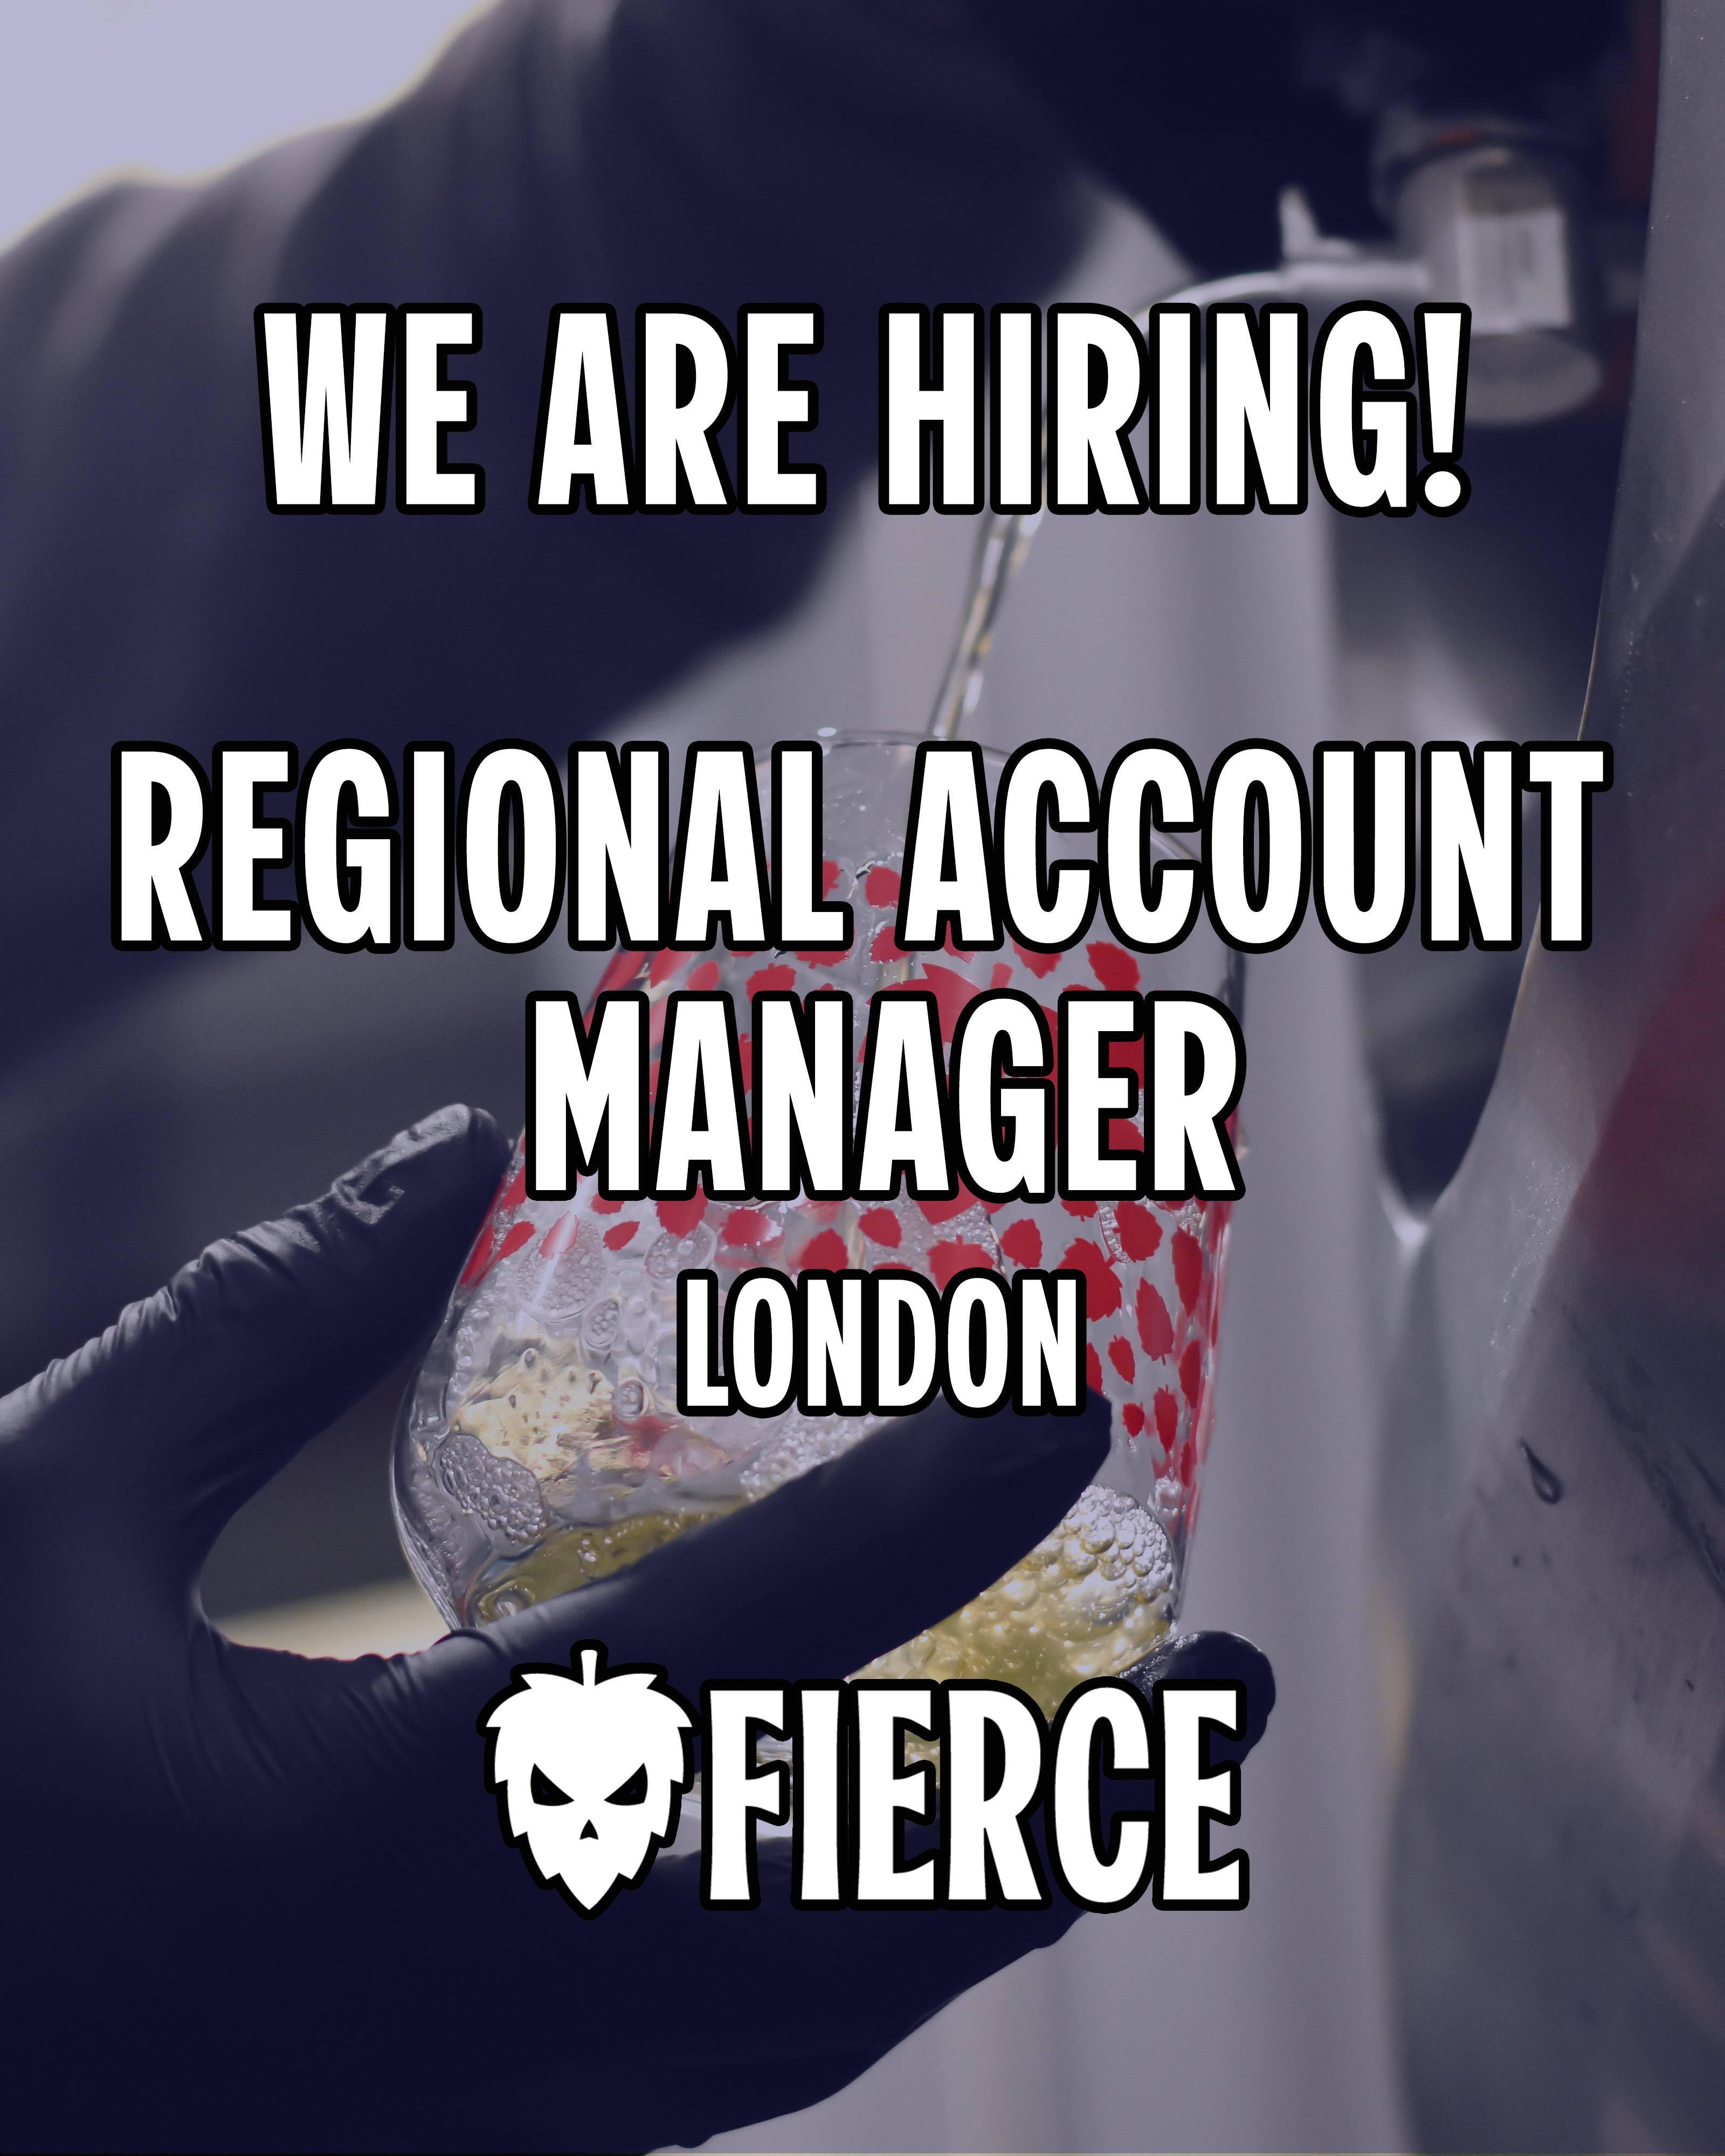 VACANCY - REGIONAL ACCOUNT MANAGER